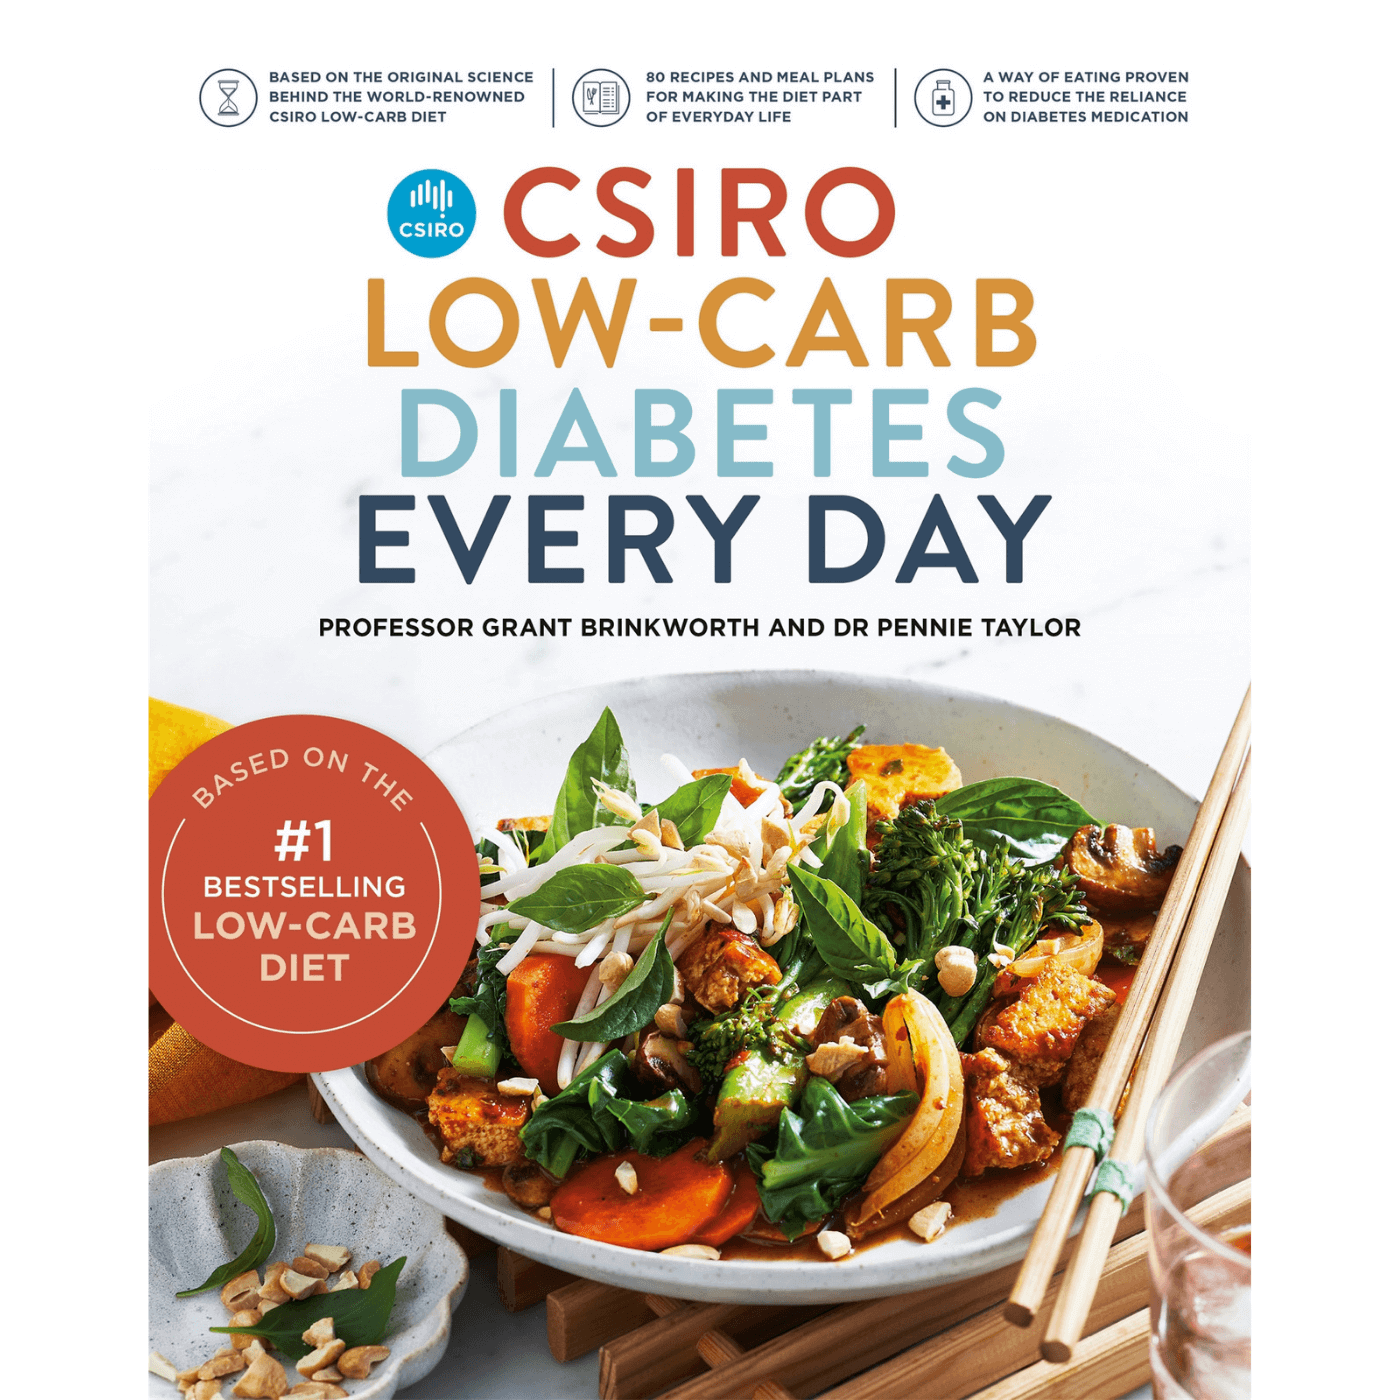 CSIRO Low-Carb Diabetes Every Day' cookbook: front cover